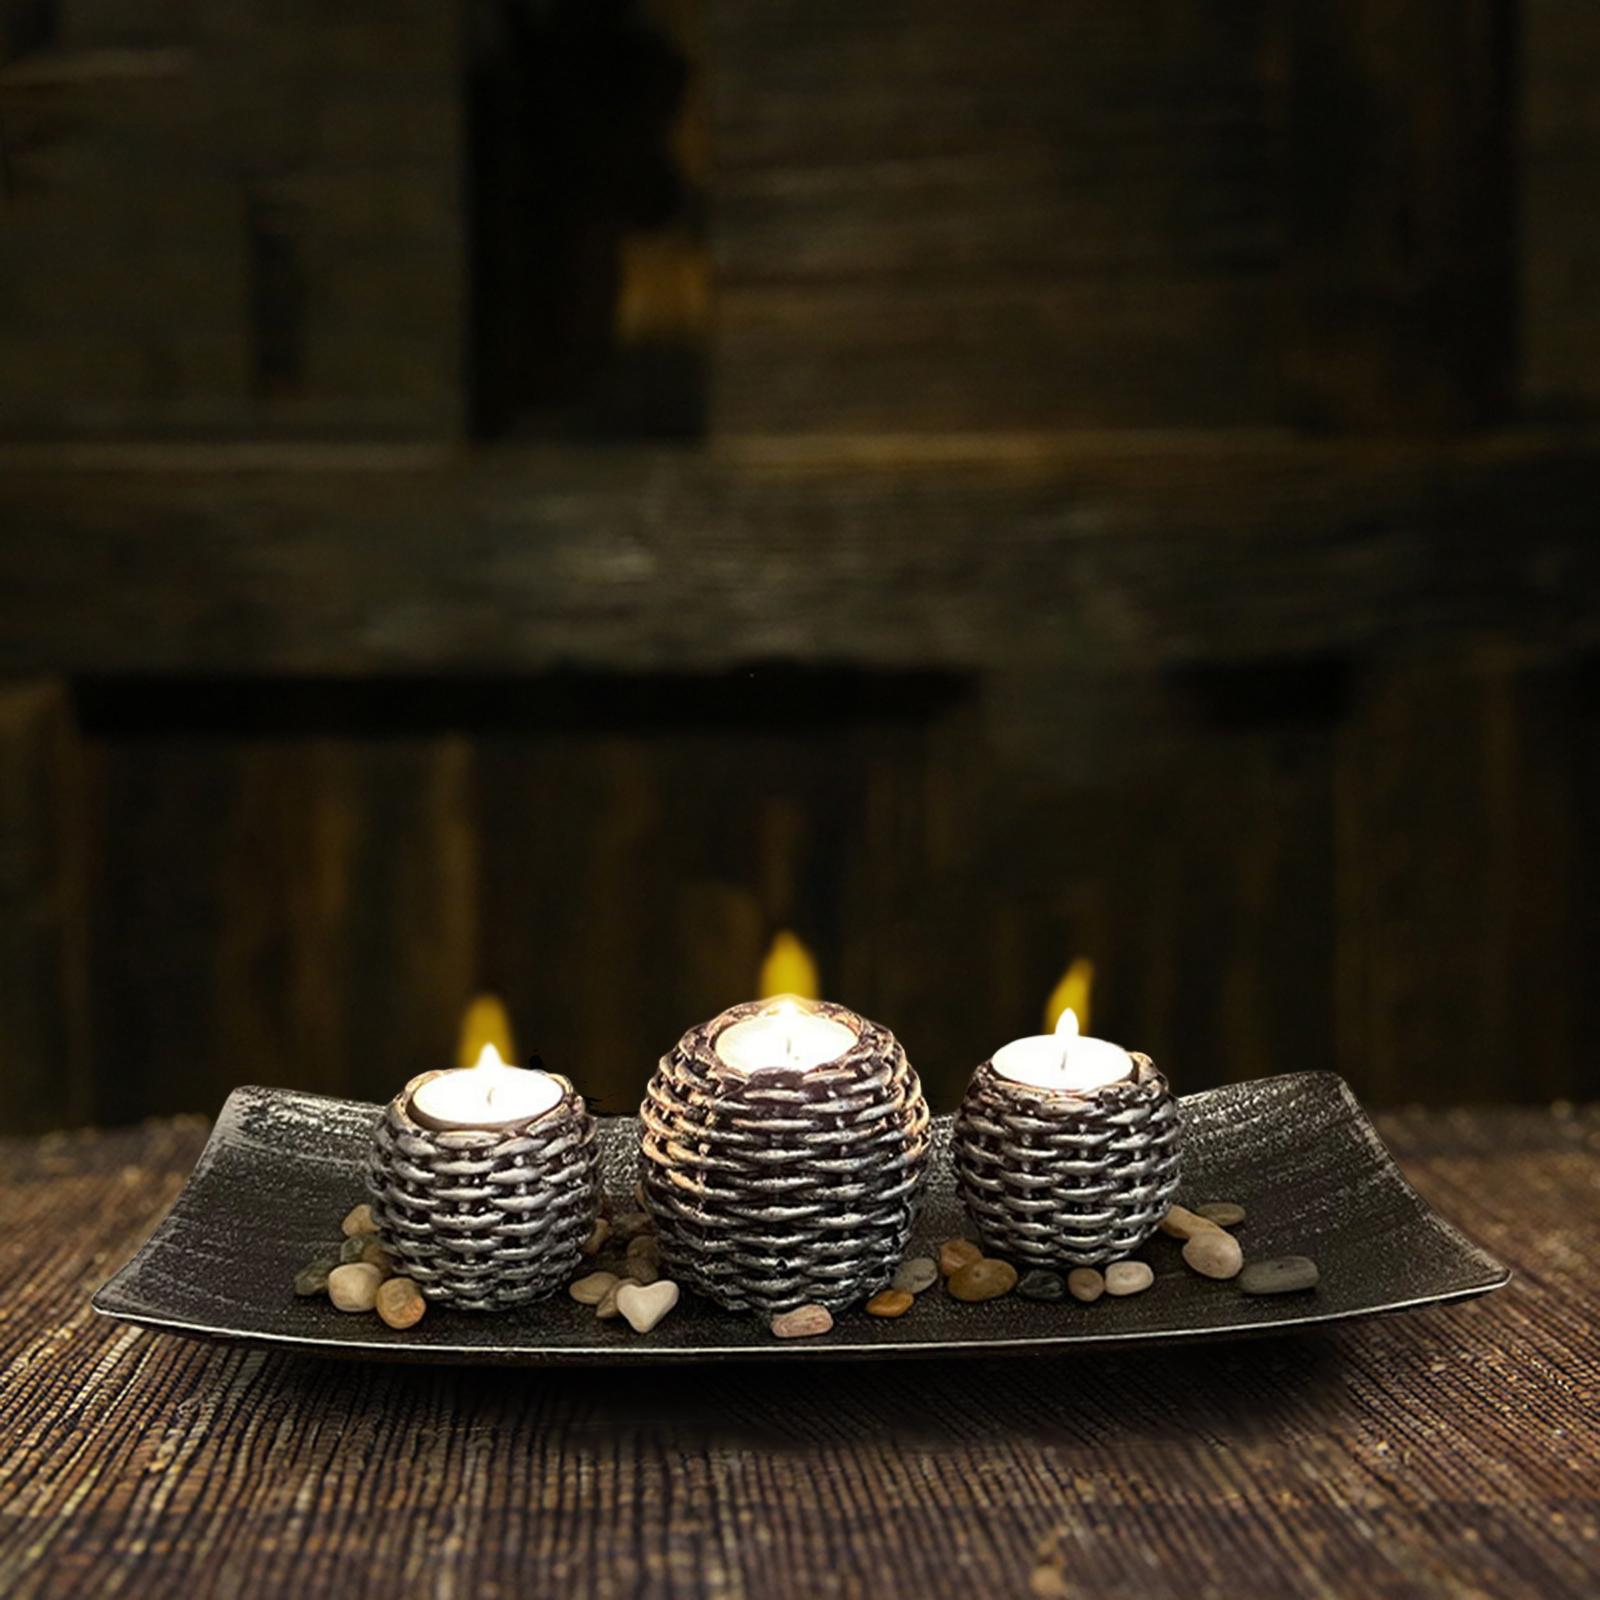 Antique Rattan Candle Holder Set Wooden Resin Crafts Home Furnishing 3 Cpus